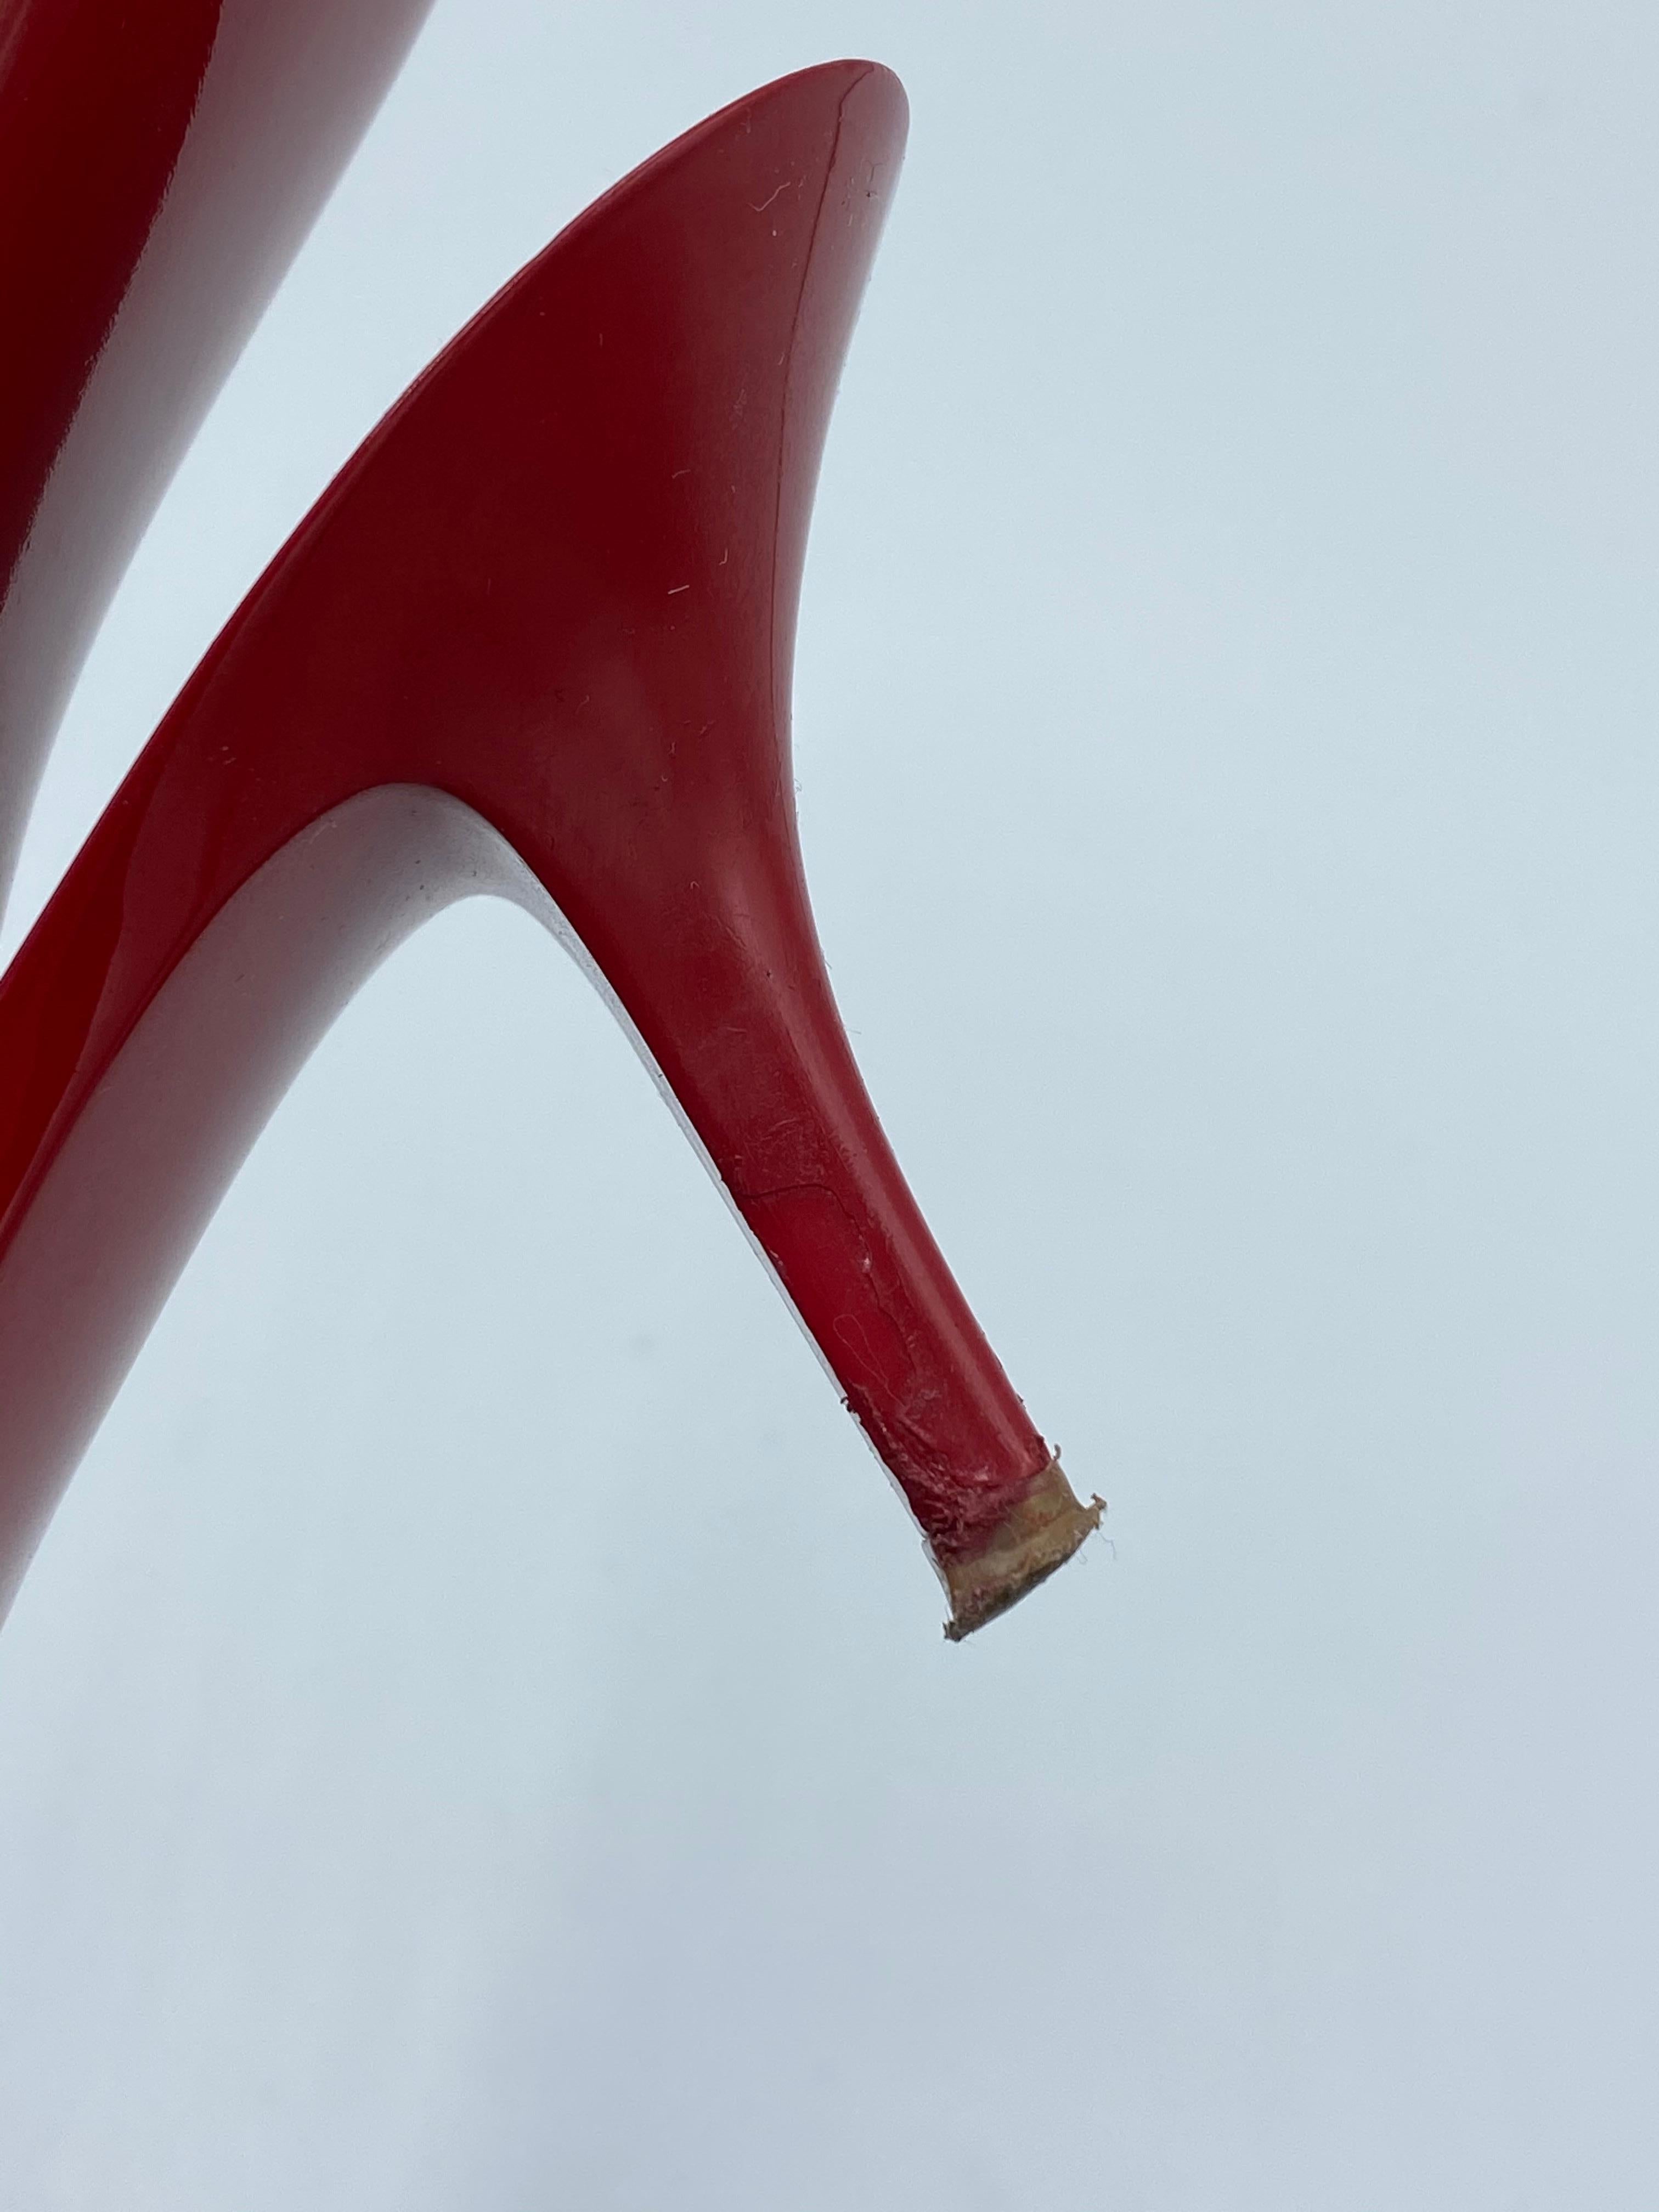 Maison Margiela Red Patent Leather Pump Heels Size 38 For Sale 8